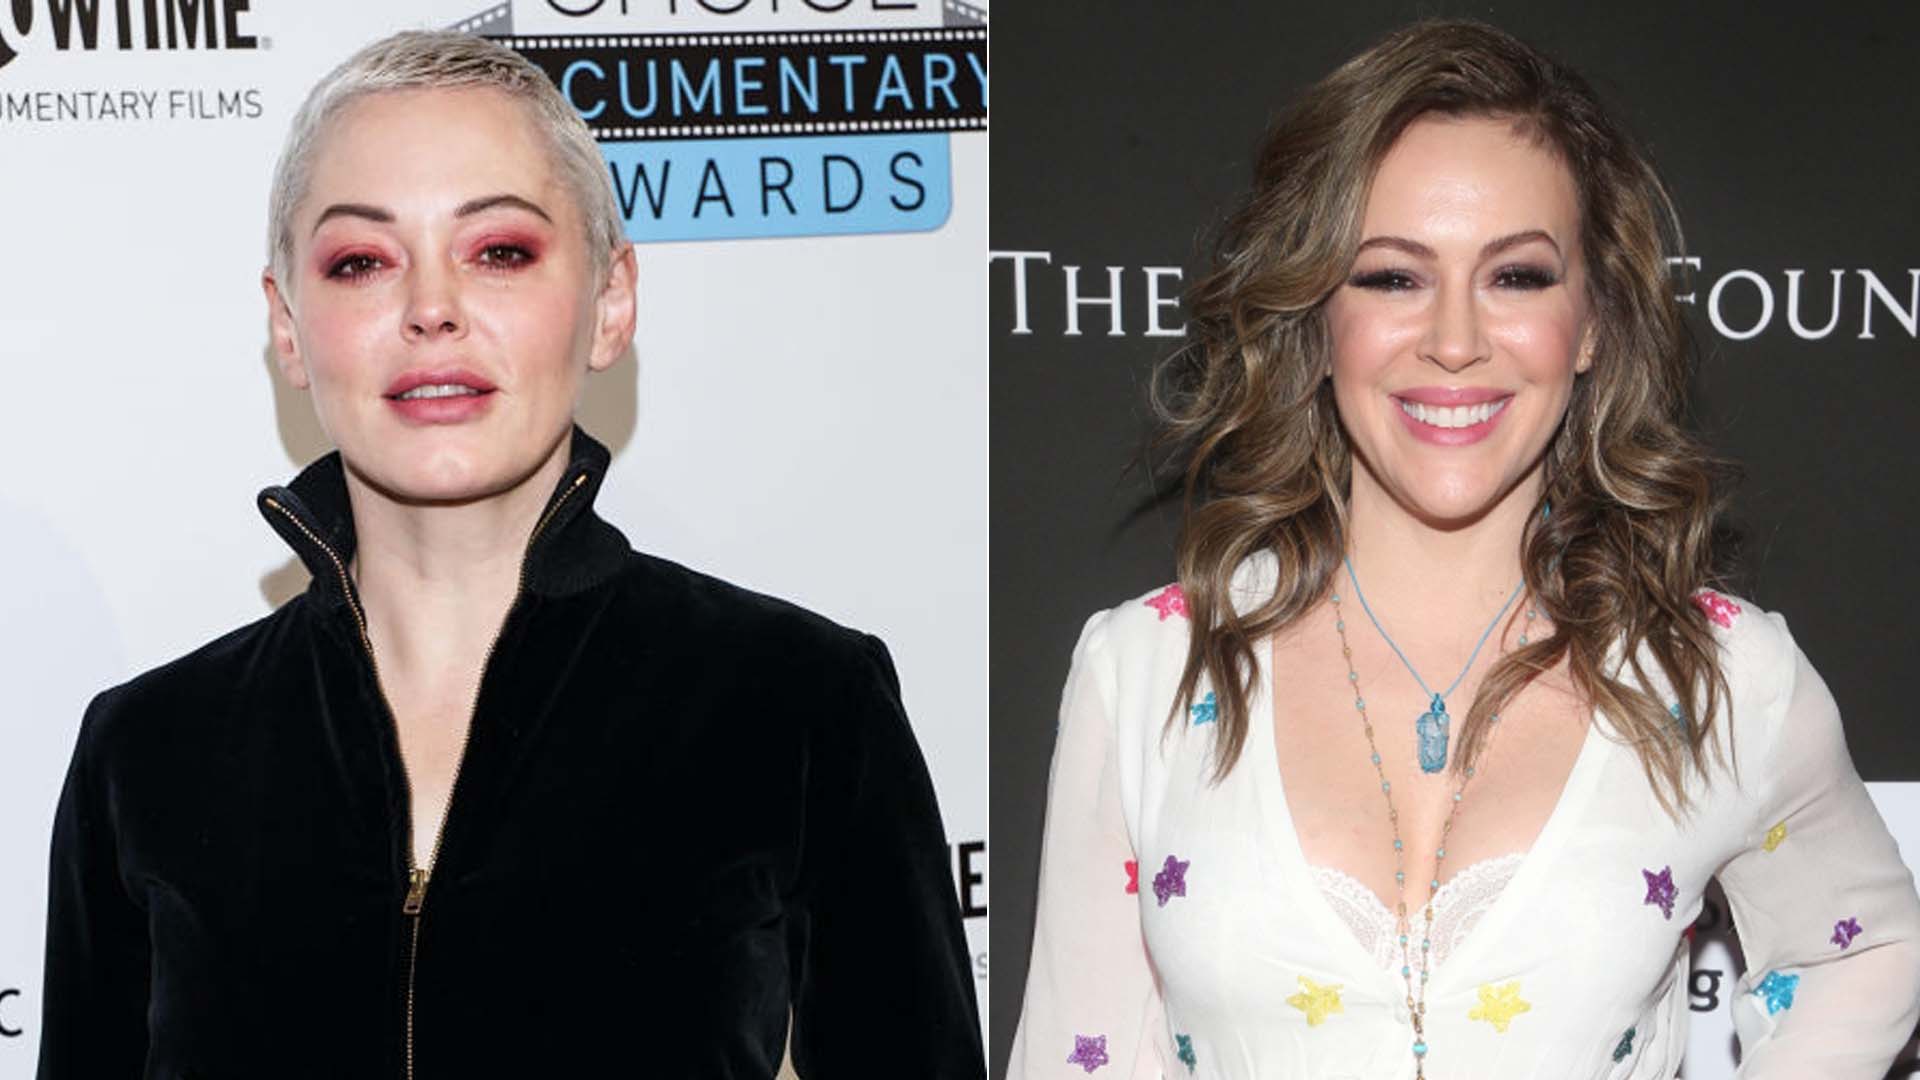 Rose mcgowan calls alyssa milano a metoo fraud accuses her of making charmed set toxic